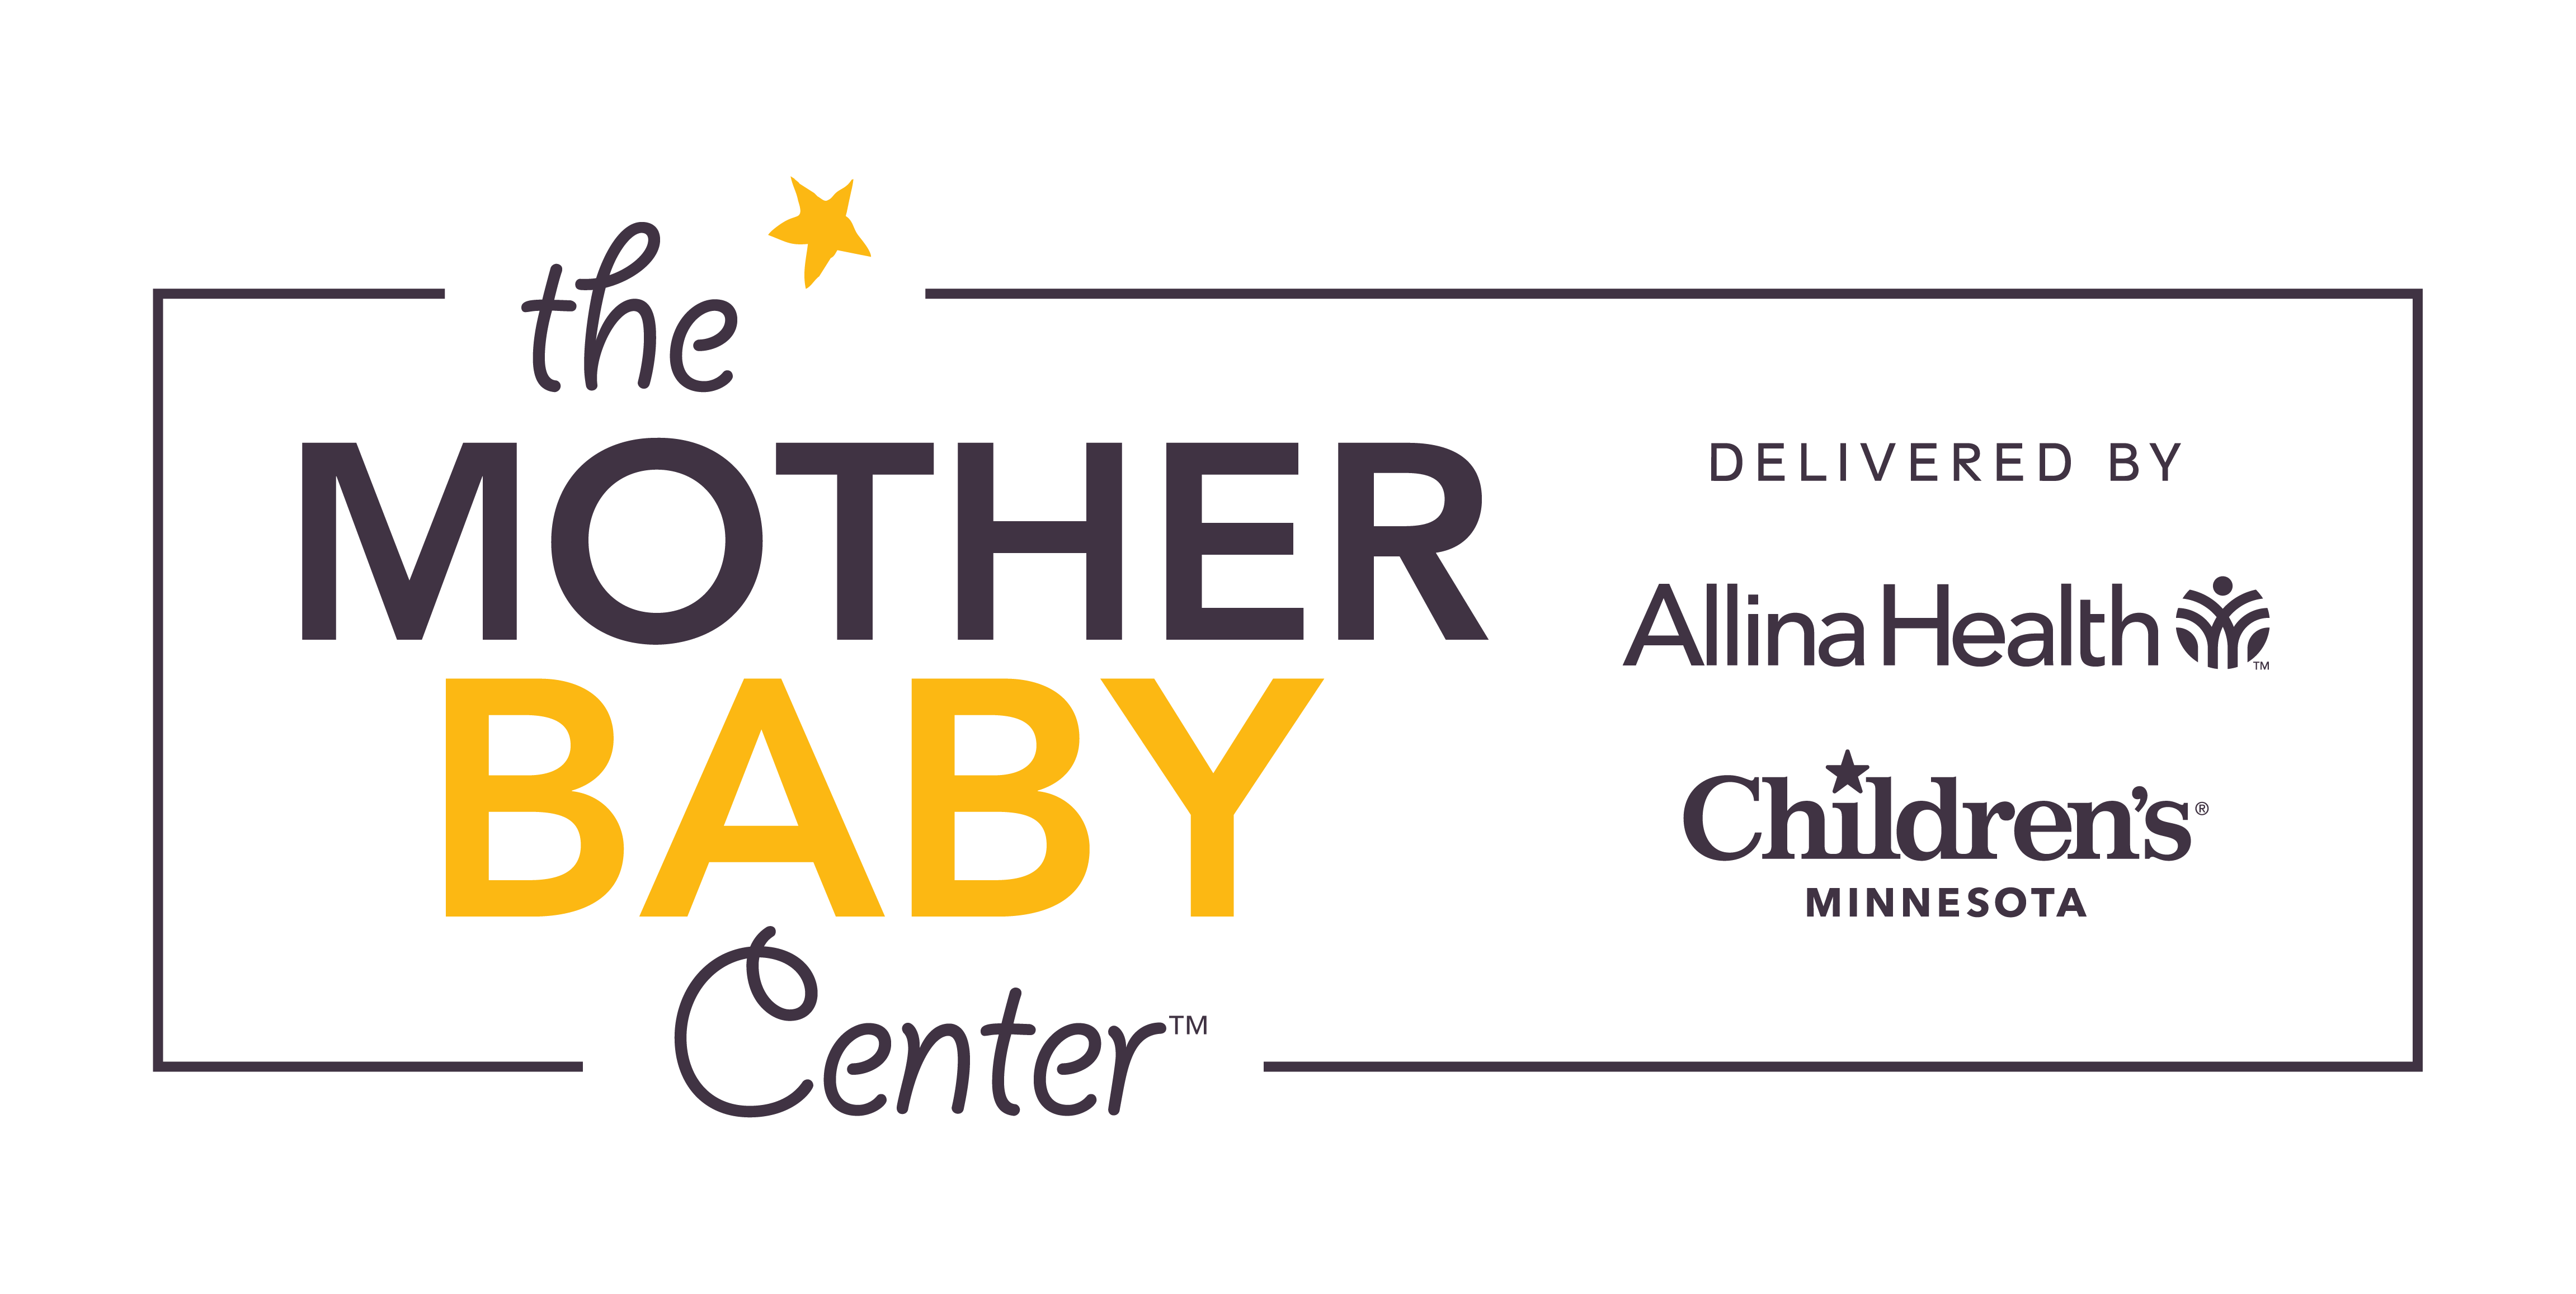 The Mother Baby Center | Delivered by Allina Health and Children's Minnesota